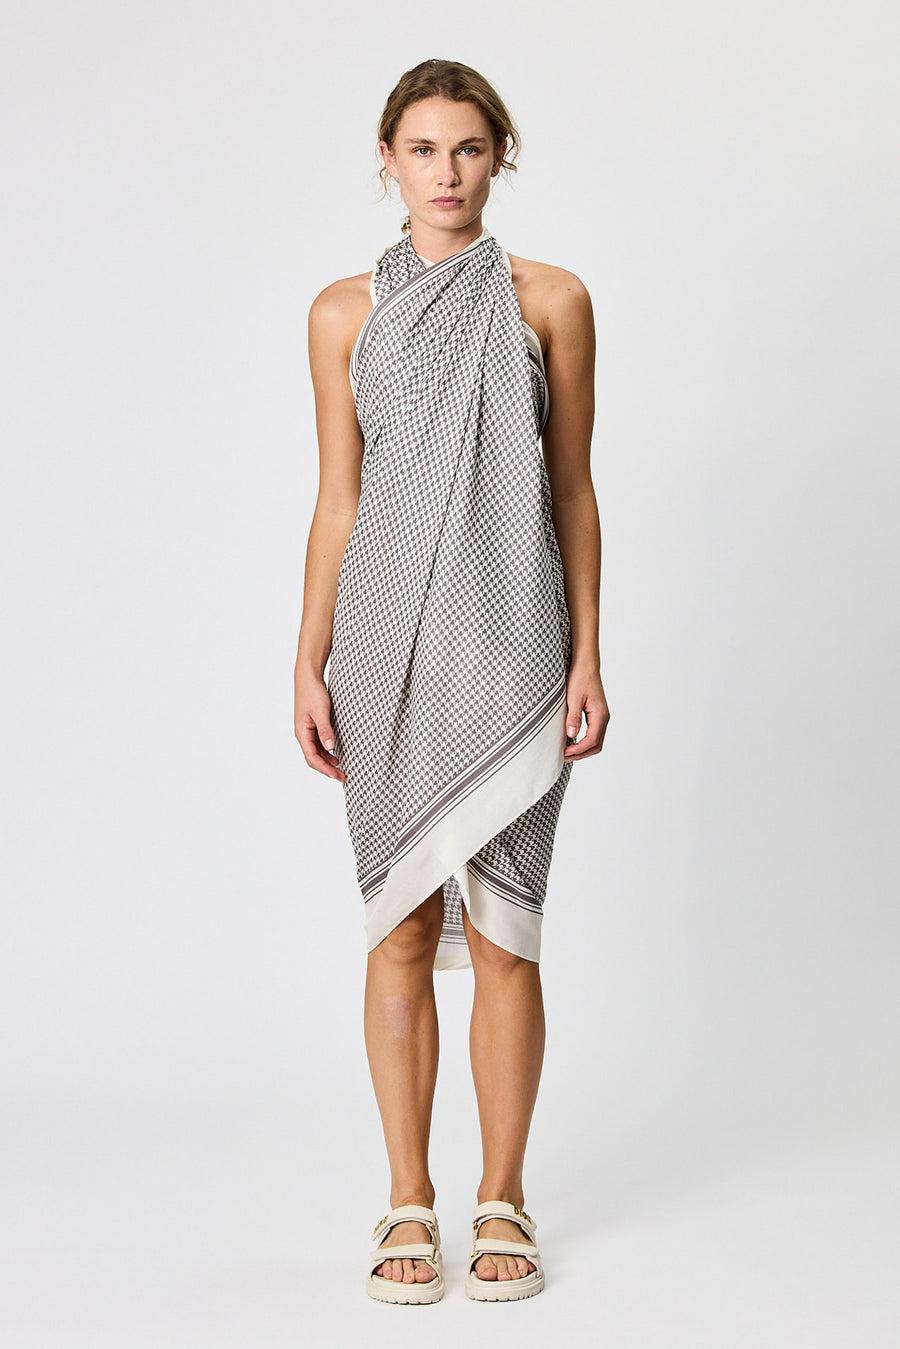 ELLIE LARGE SARONG - CHARCOAL HOUNDSTOOTH